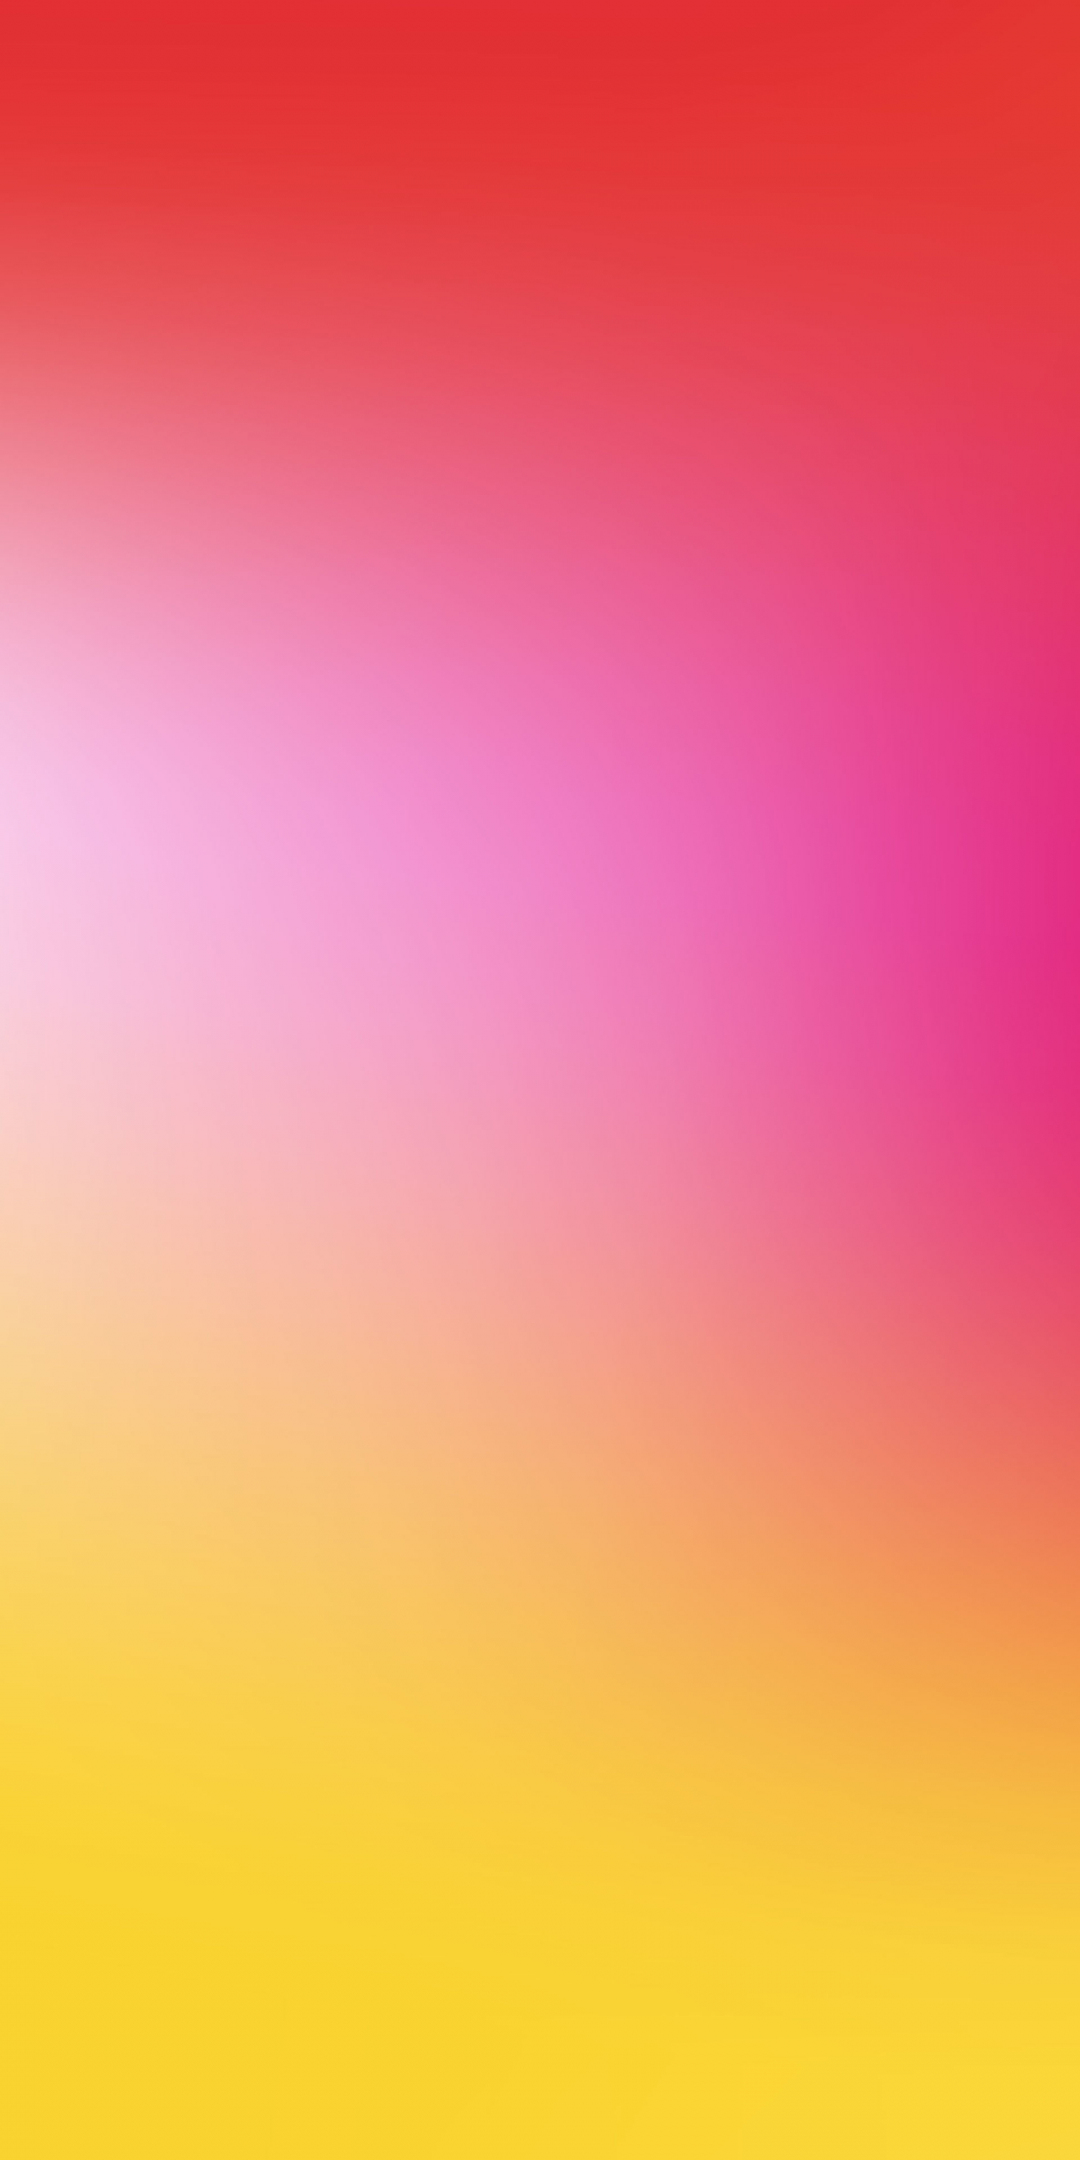 Gradient, yellow and pink colors, abstract, 1080x2160 wallpaper